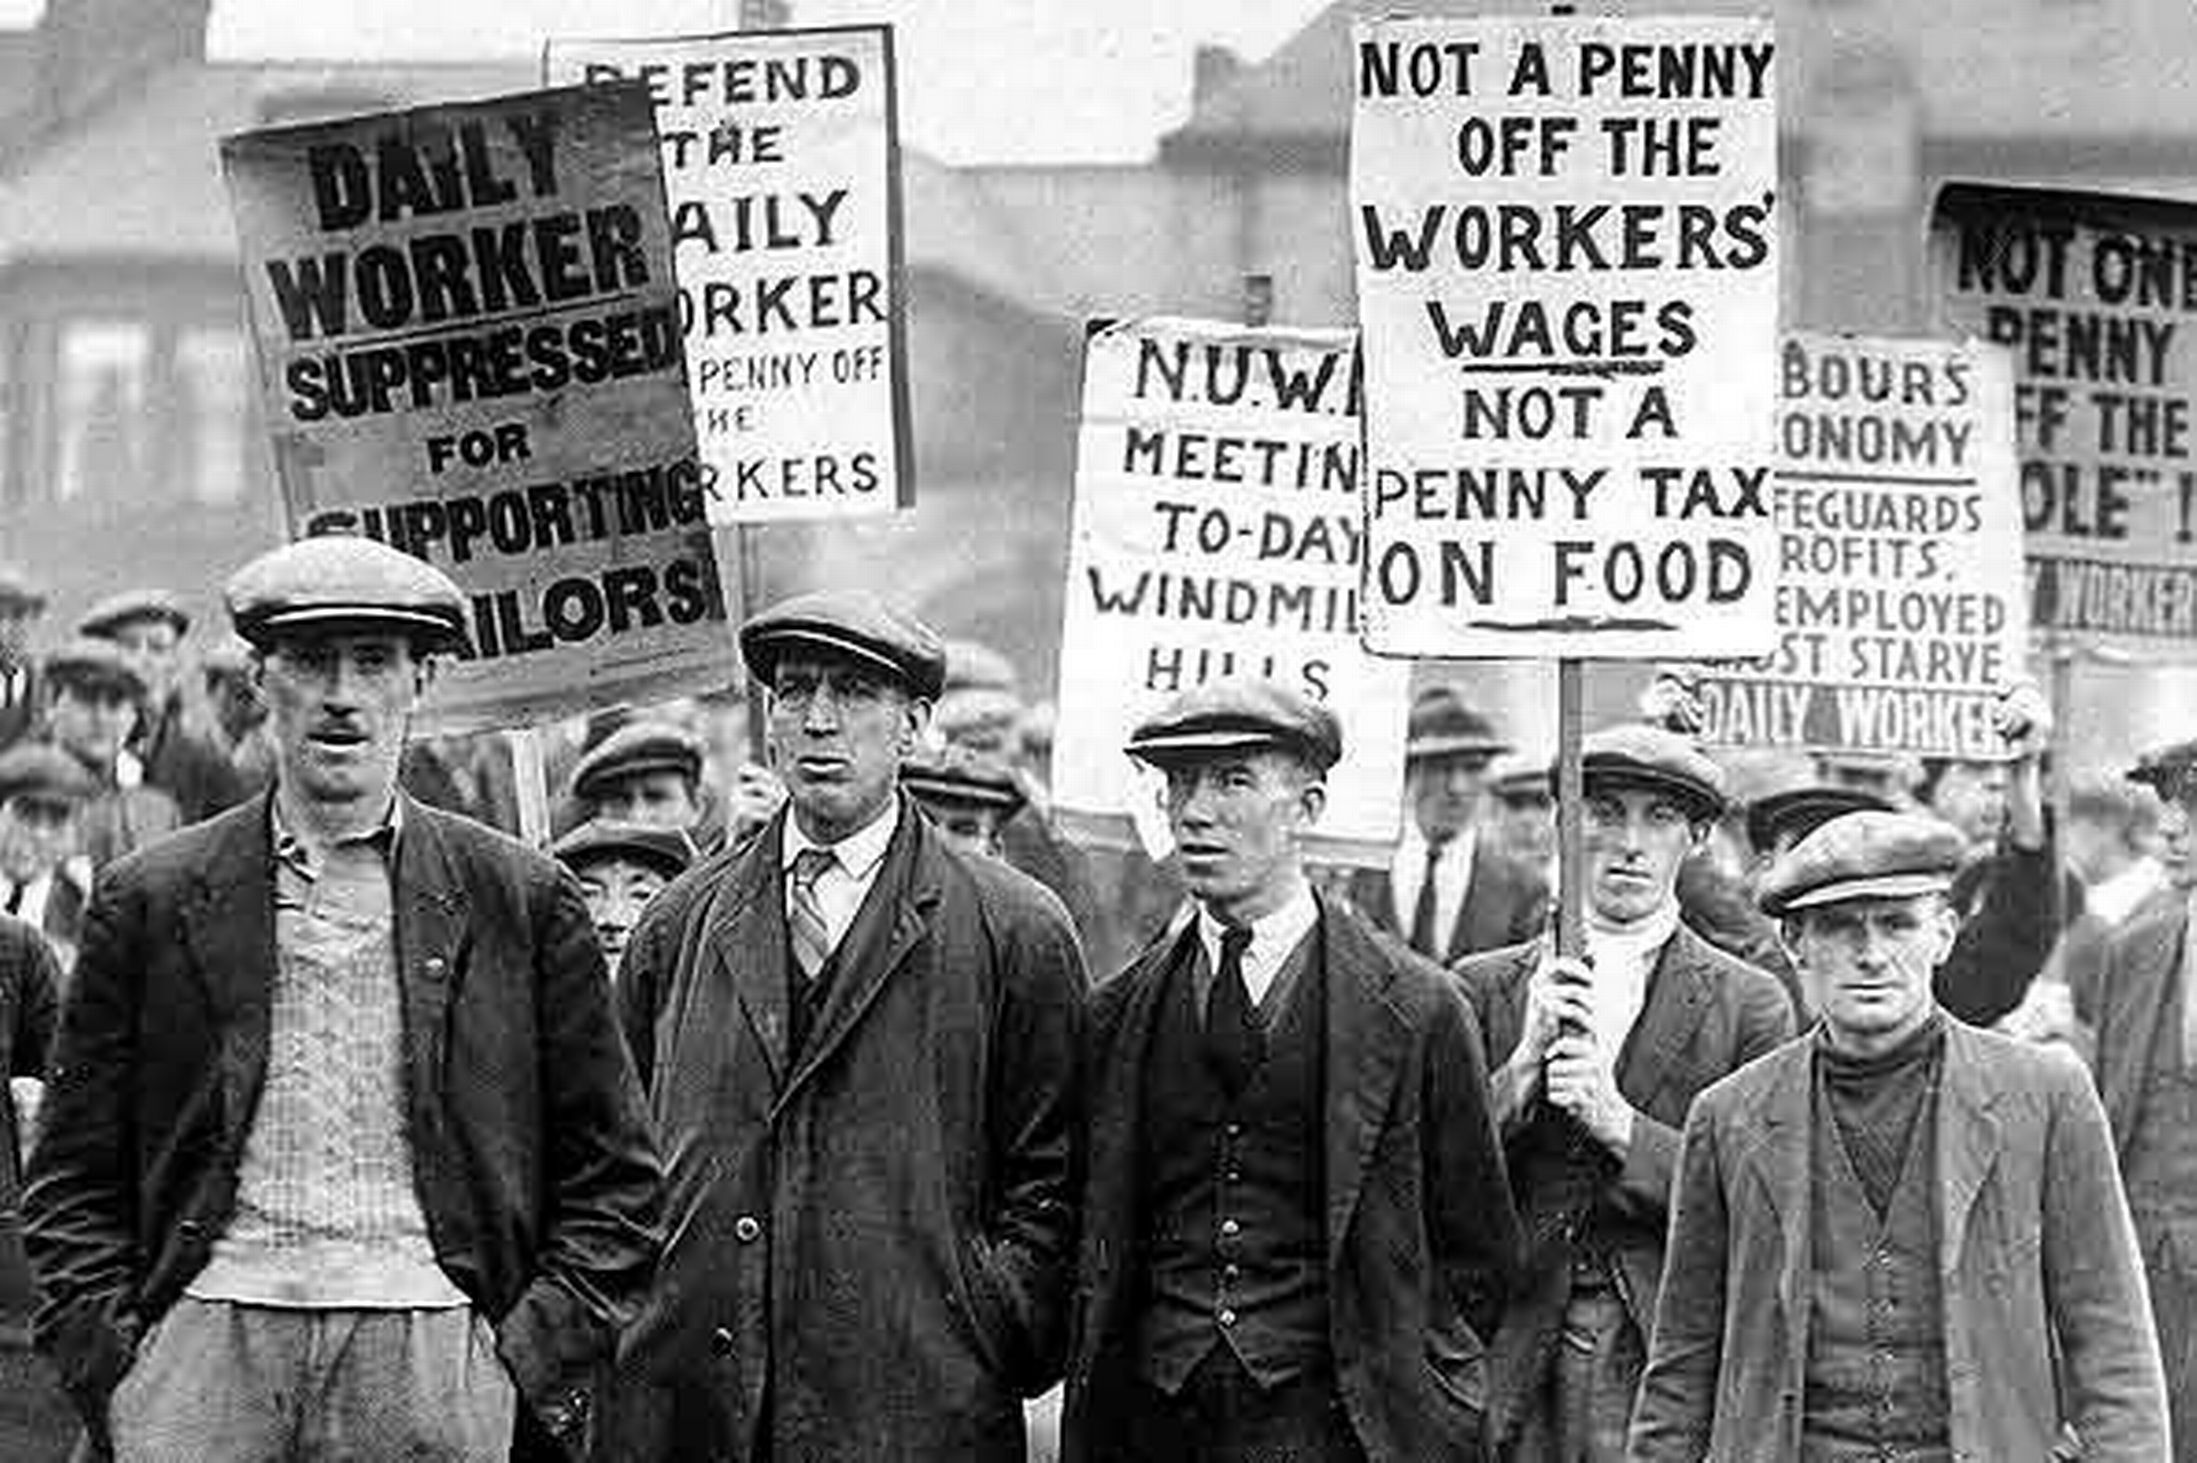 90 years since the British General Strike: The lessons for today | The British Labour movement | History & Theory